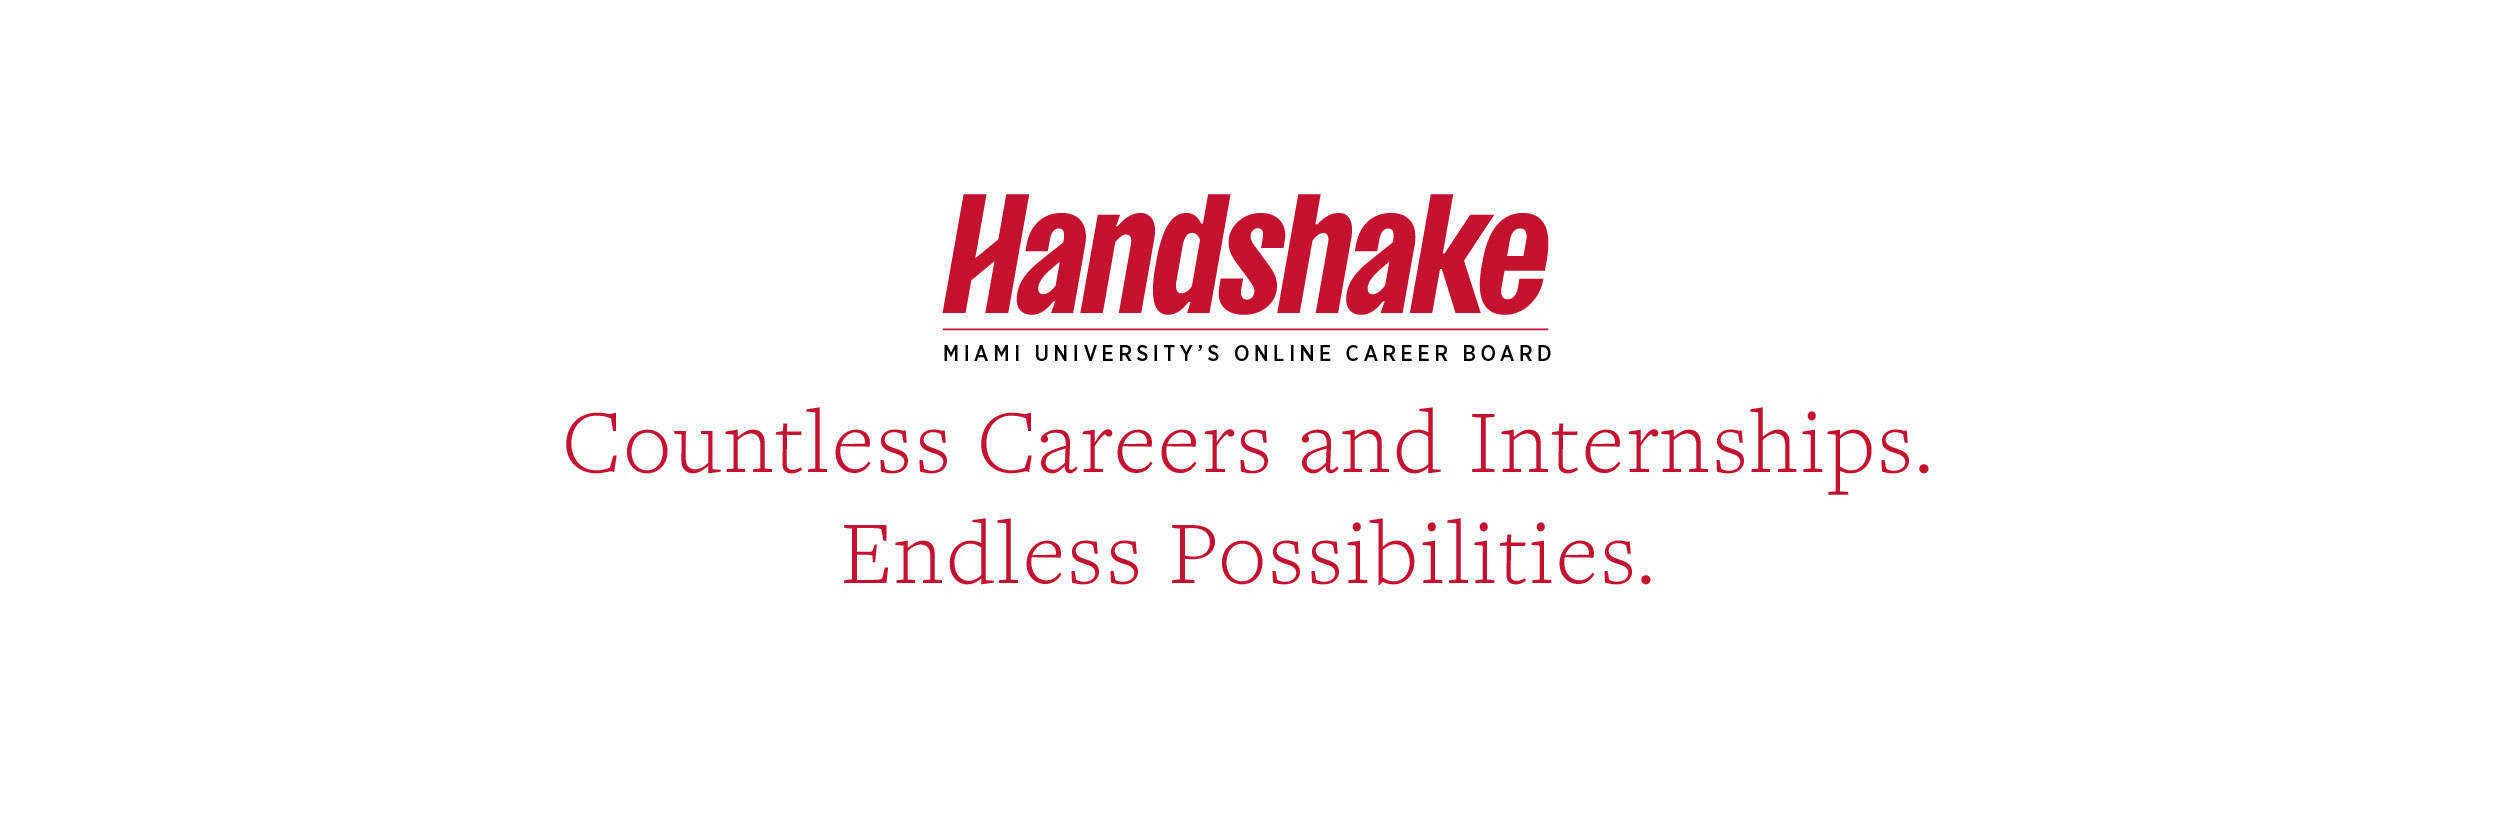  Handshake, Miami's Online Career Board with countless job and internship opportunities and endless possibilities